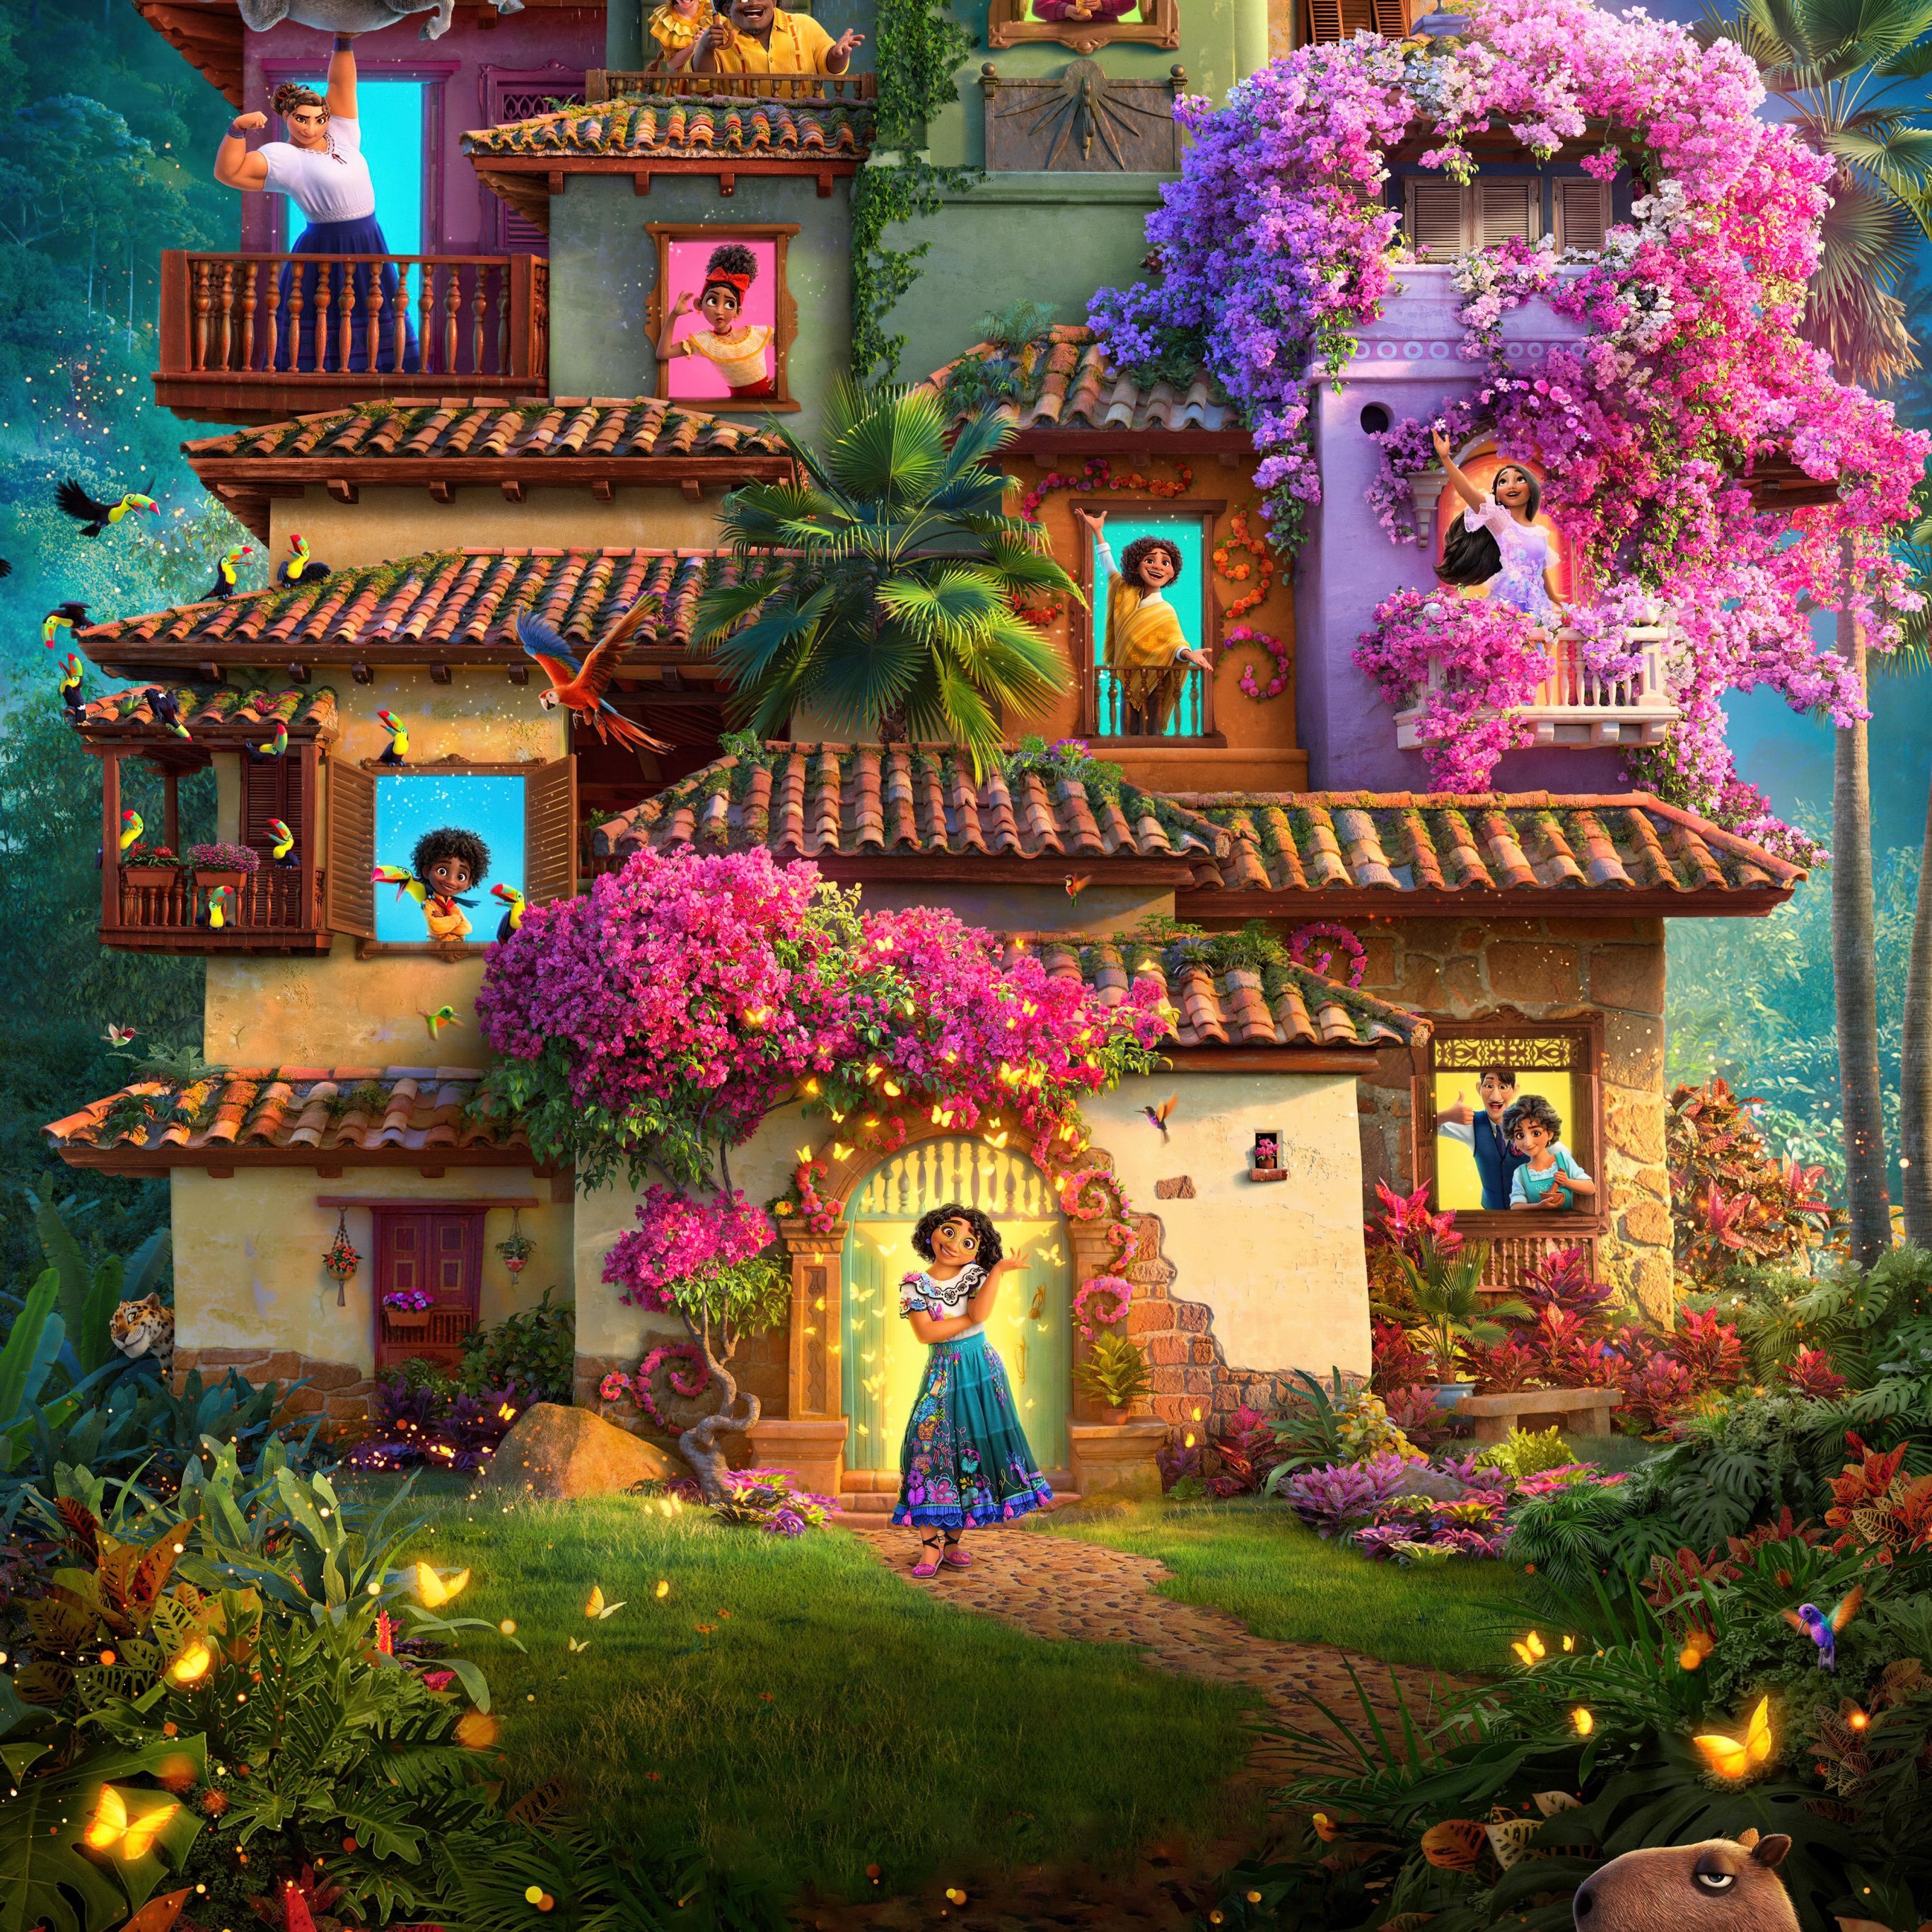 A poster of the movie coco - Encanto